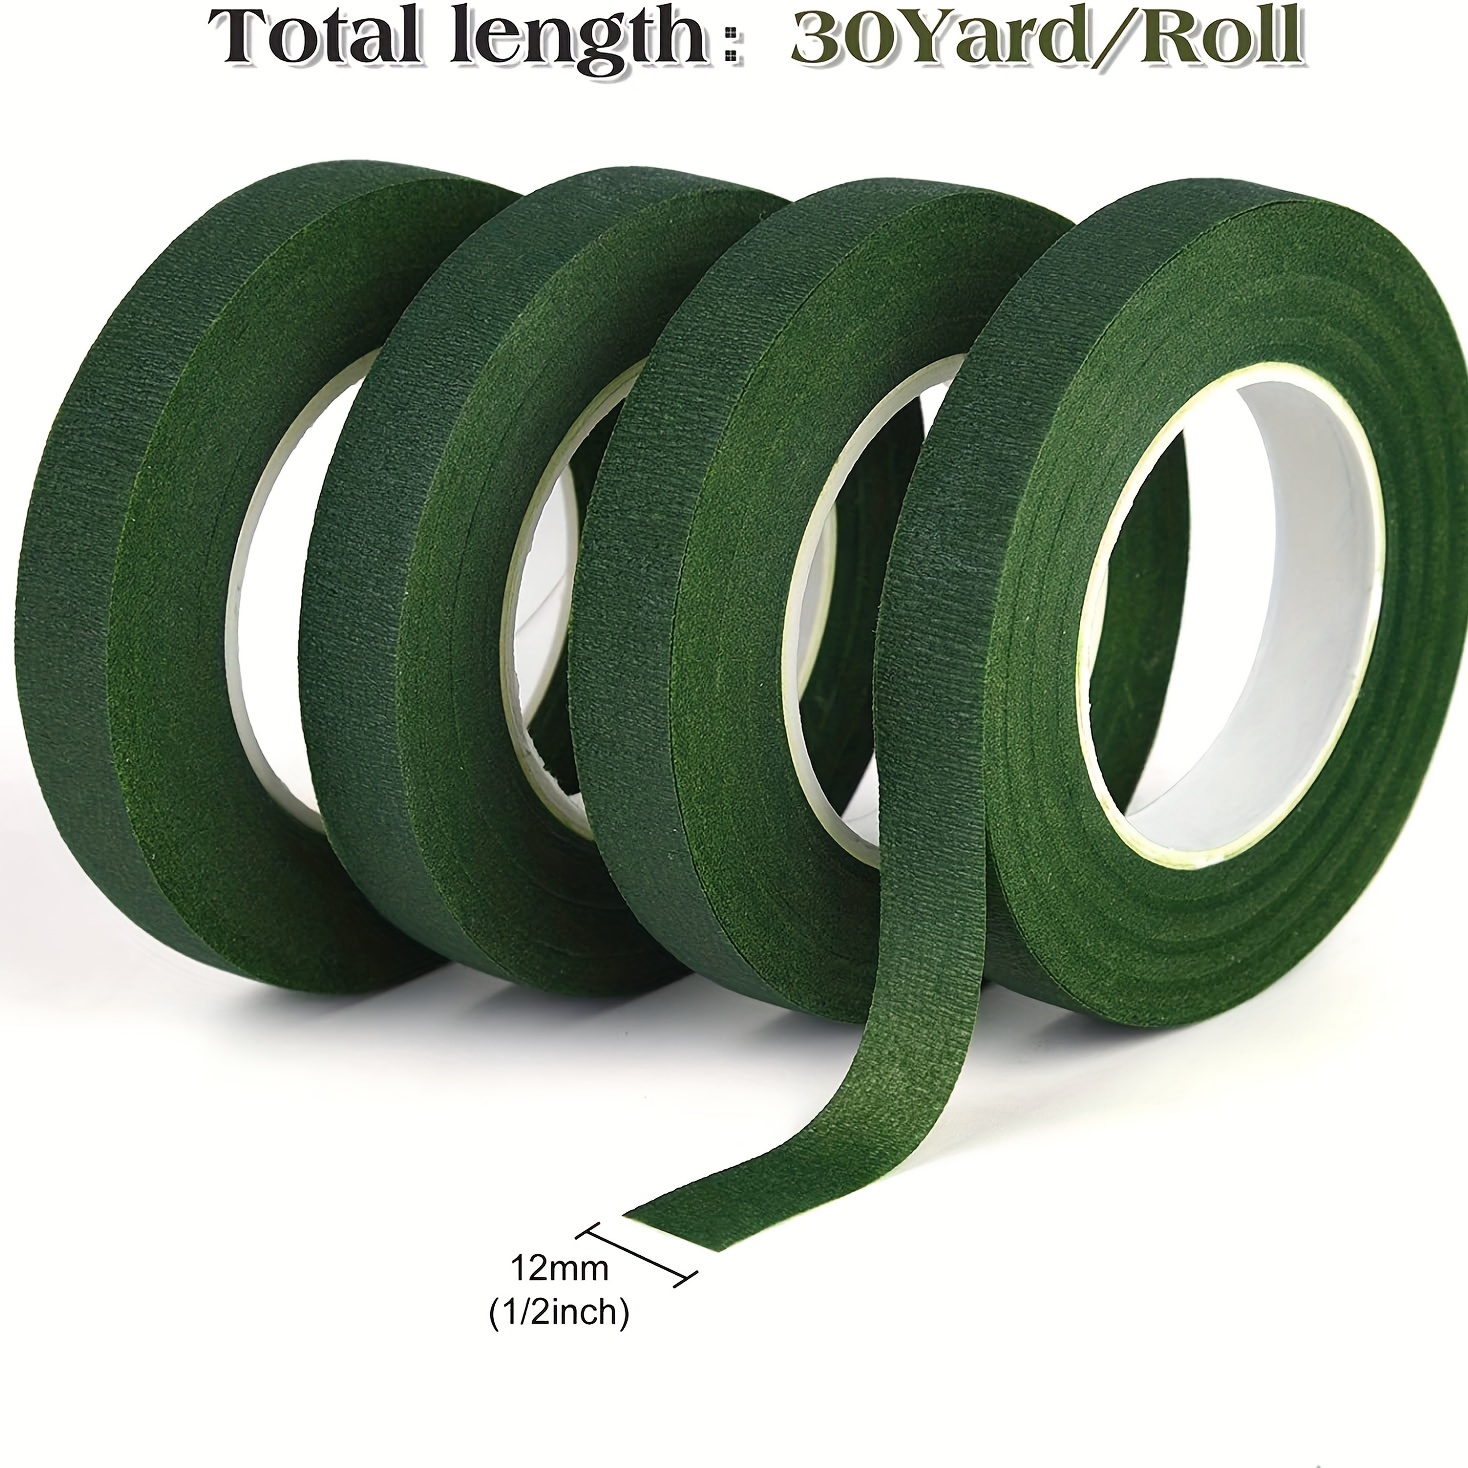 Floral Tape & Green Tape For Diy Flower Arrangements Including Flower Stems  Binding Tape And Bordering Tape For Bouquets Decoration, Flower Shop  Packaging Material